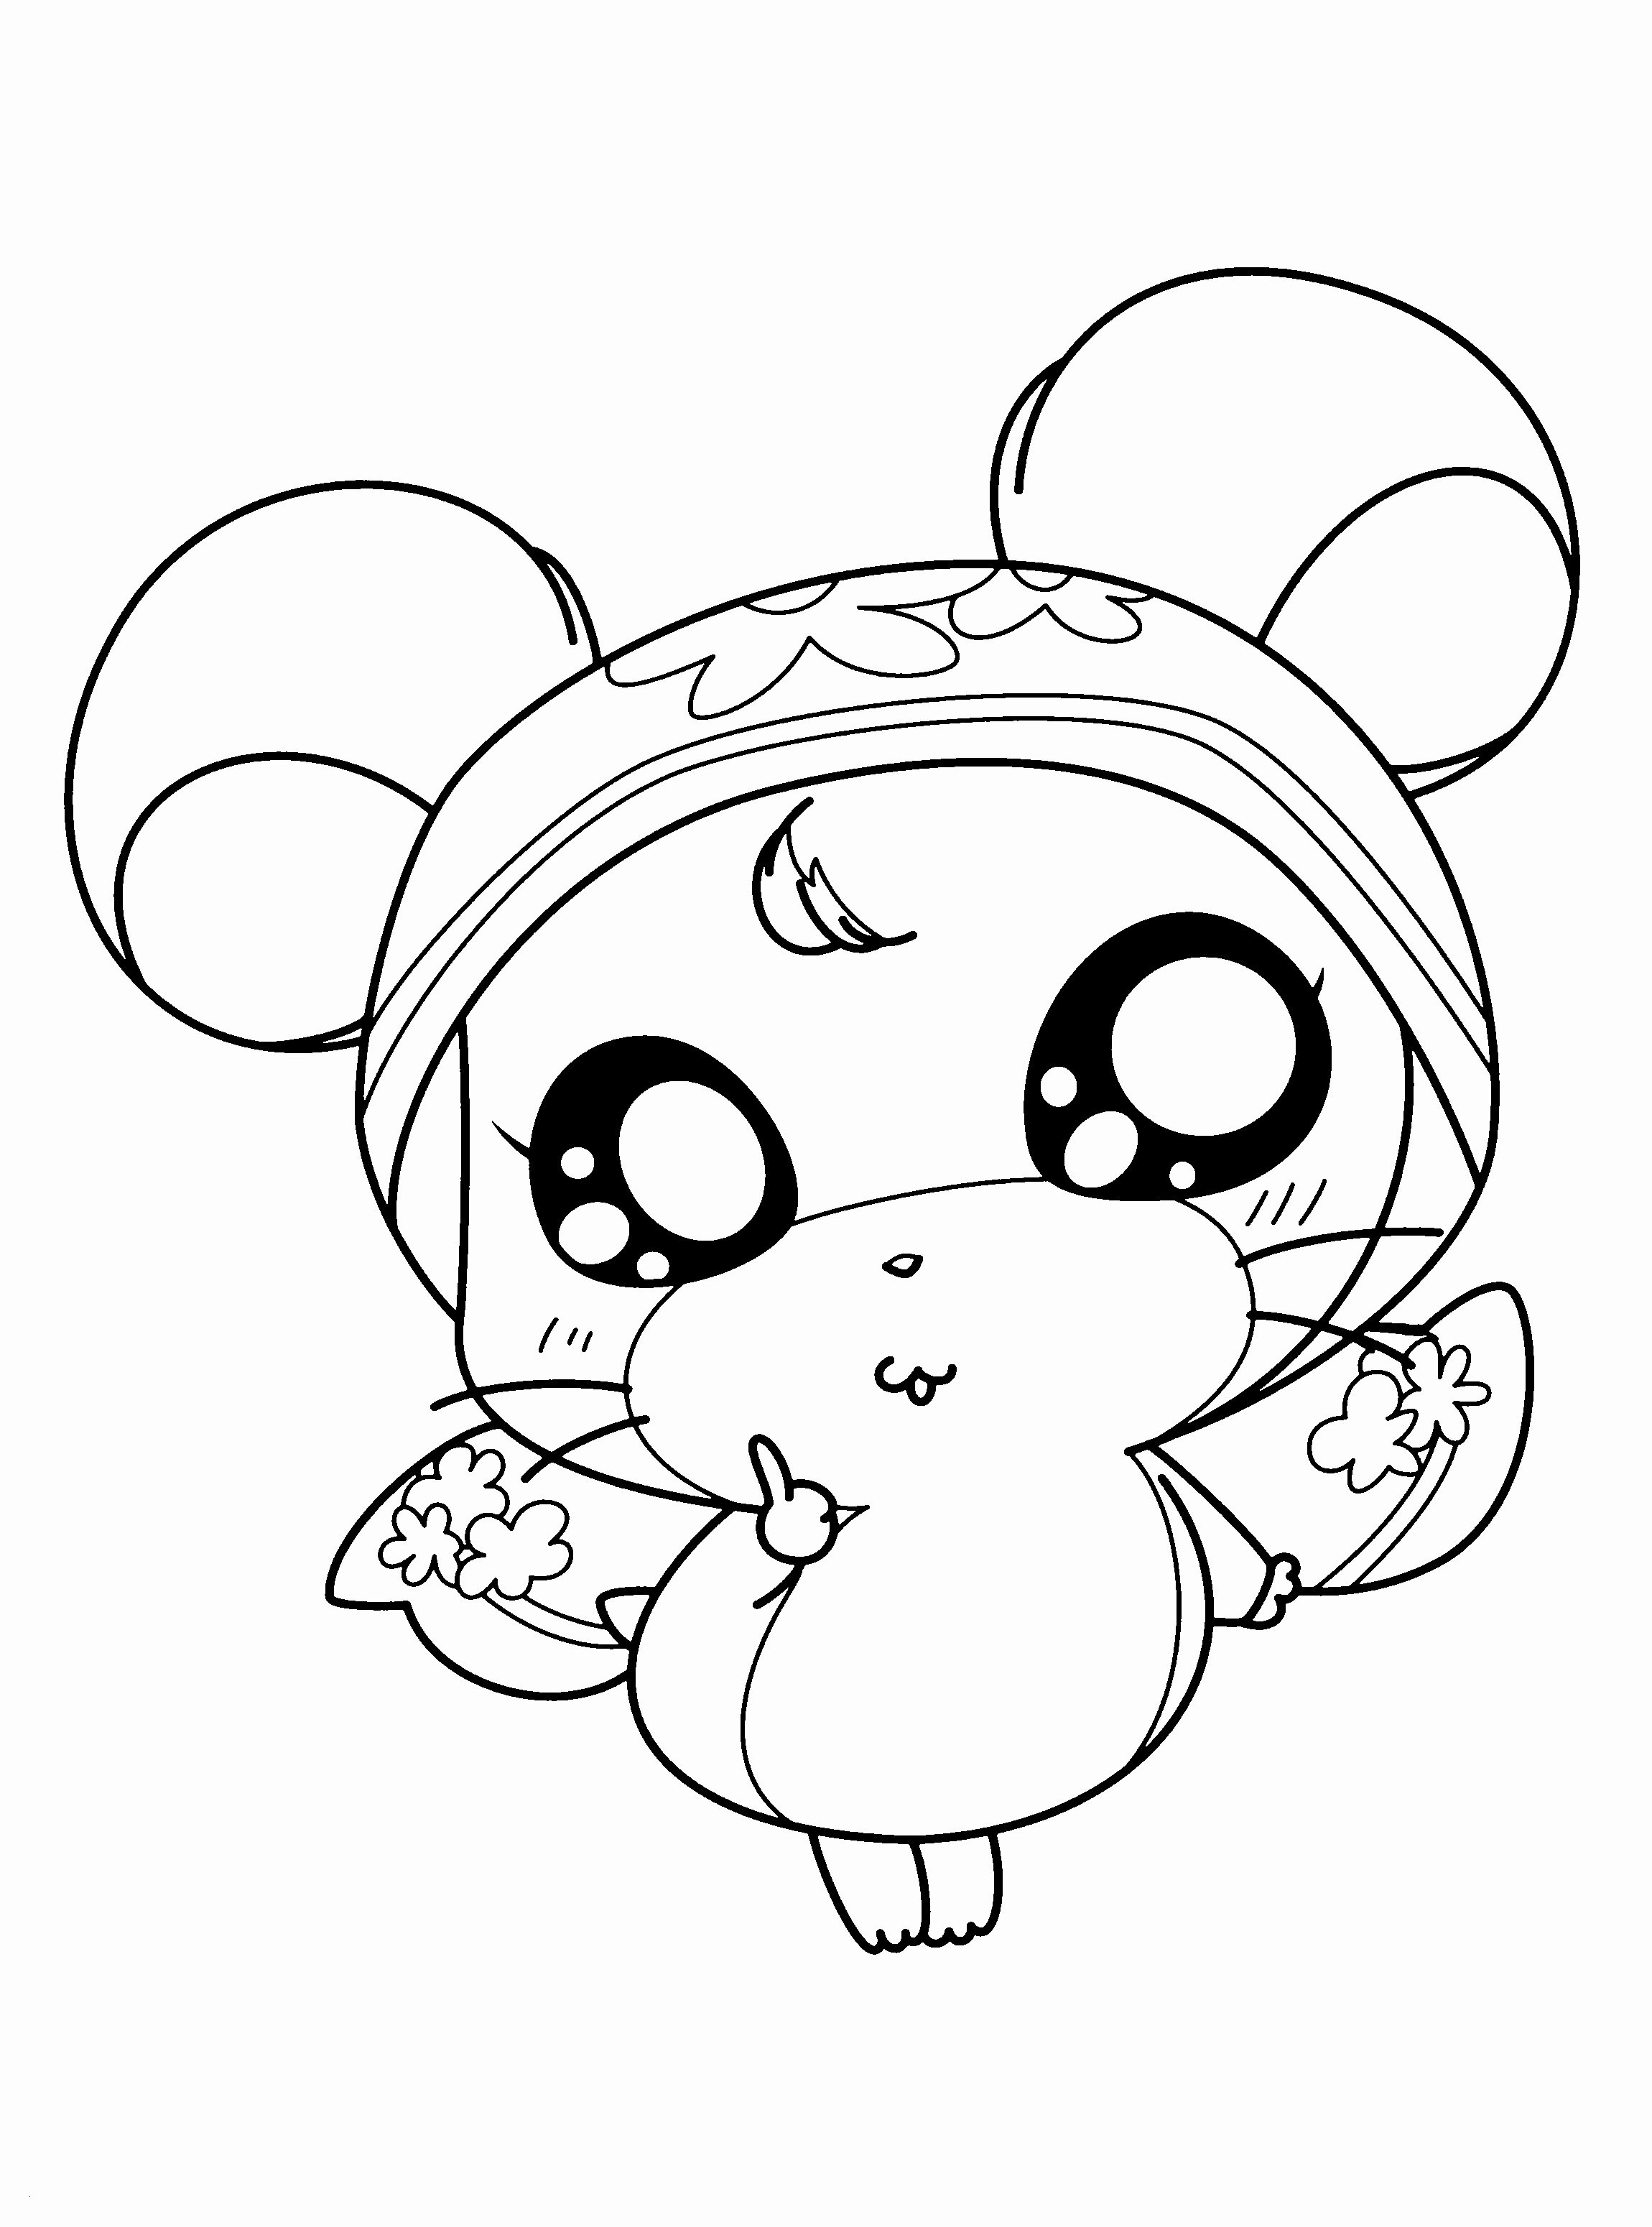 Coloring Pages Of Cute Baby Animals